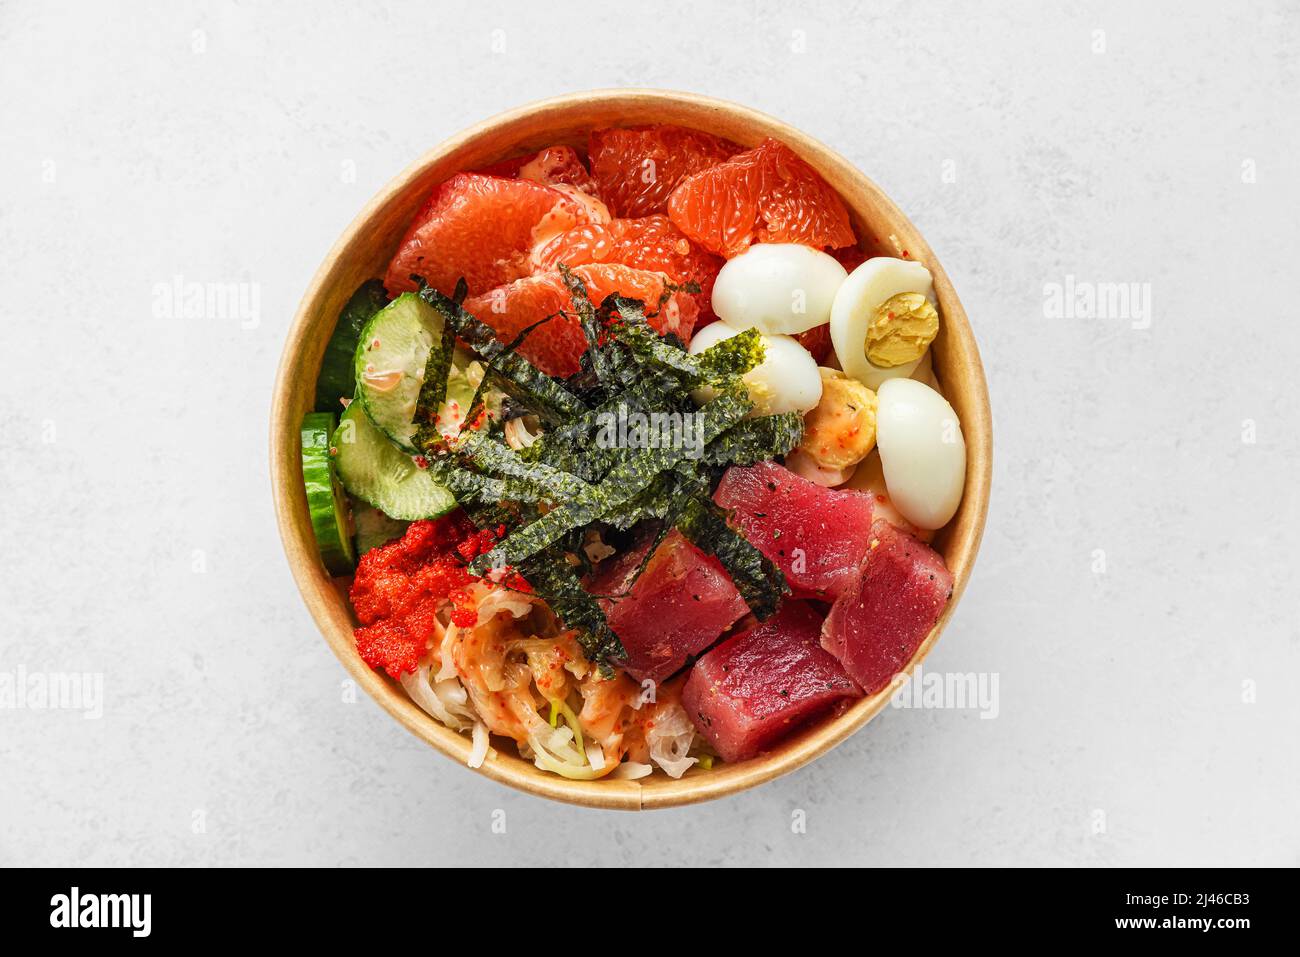 Tuna poke bowl salad in paper package for take away or food delivery on white background. Top view. Healthy food Stock Photo